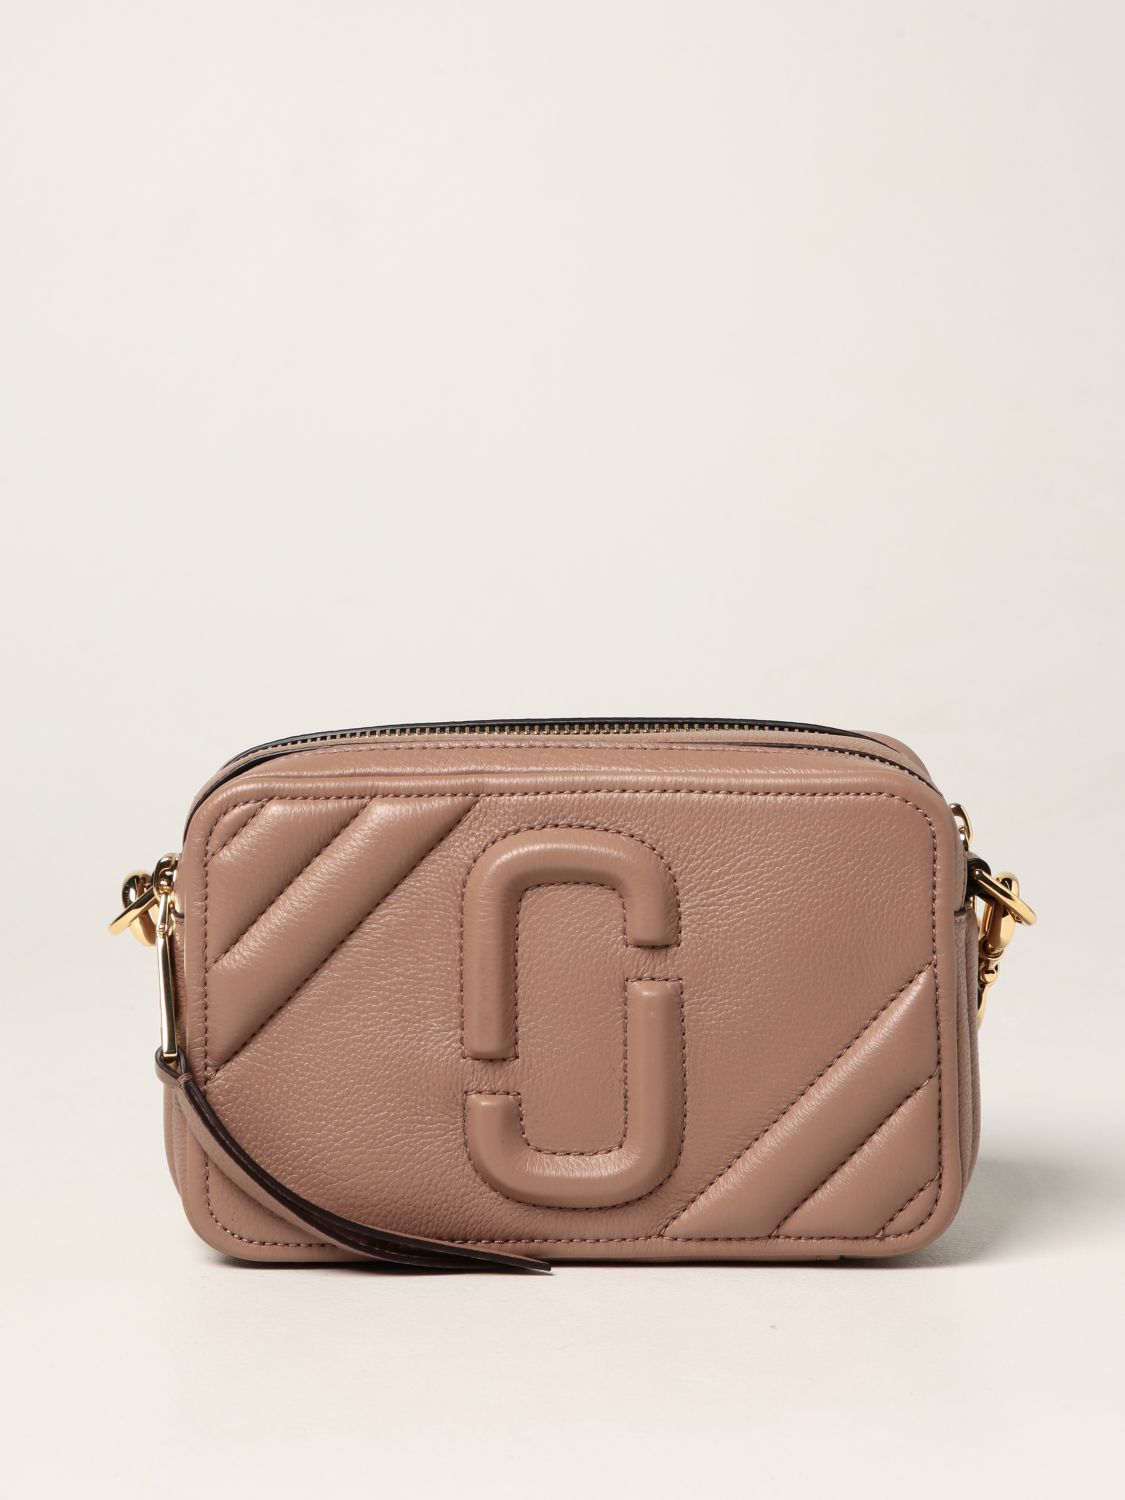 MARC JACOBS: The Moto Shot hammered leather bag - Beige | Marc Jacobs ...